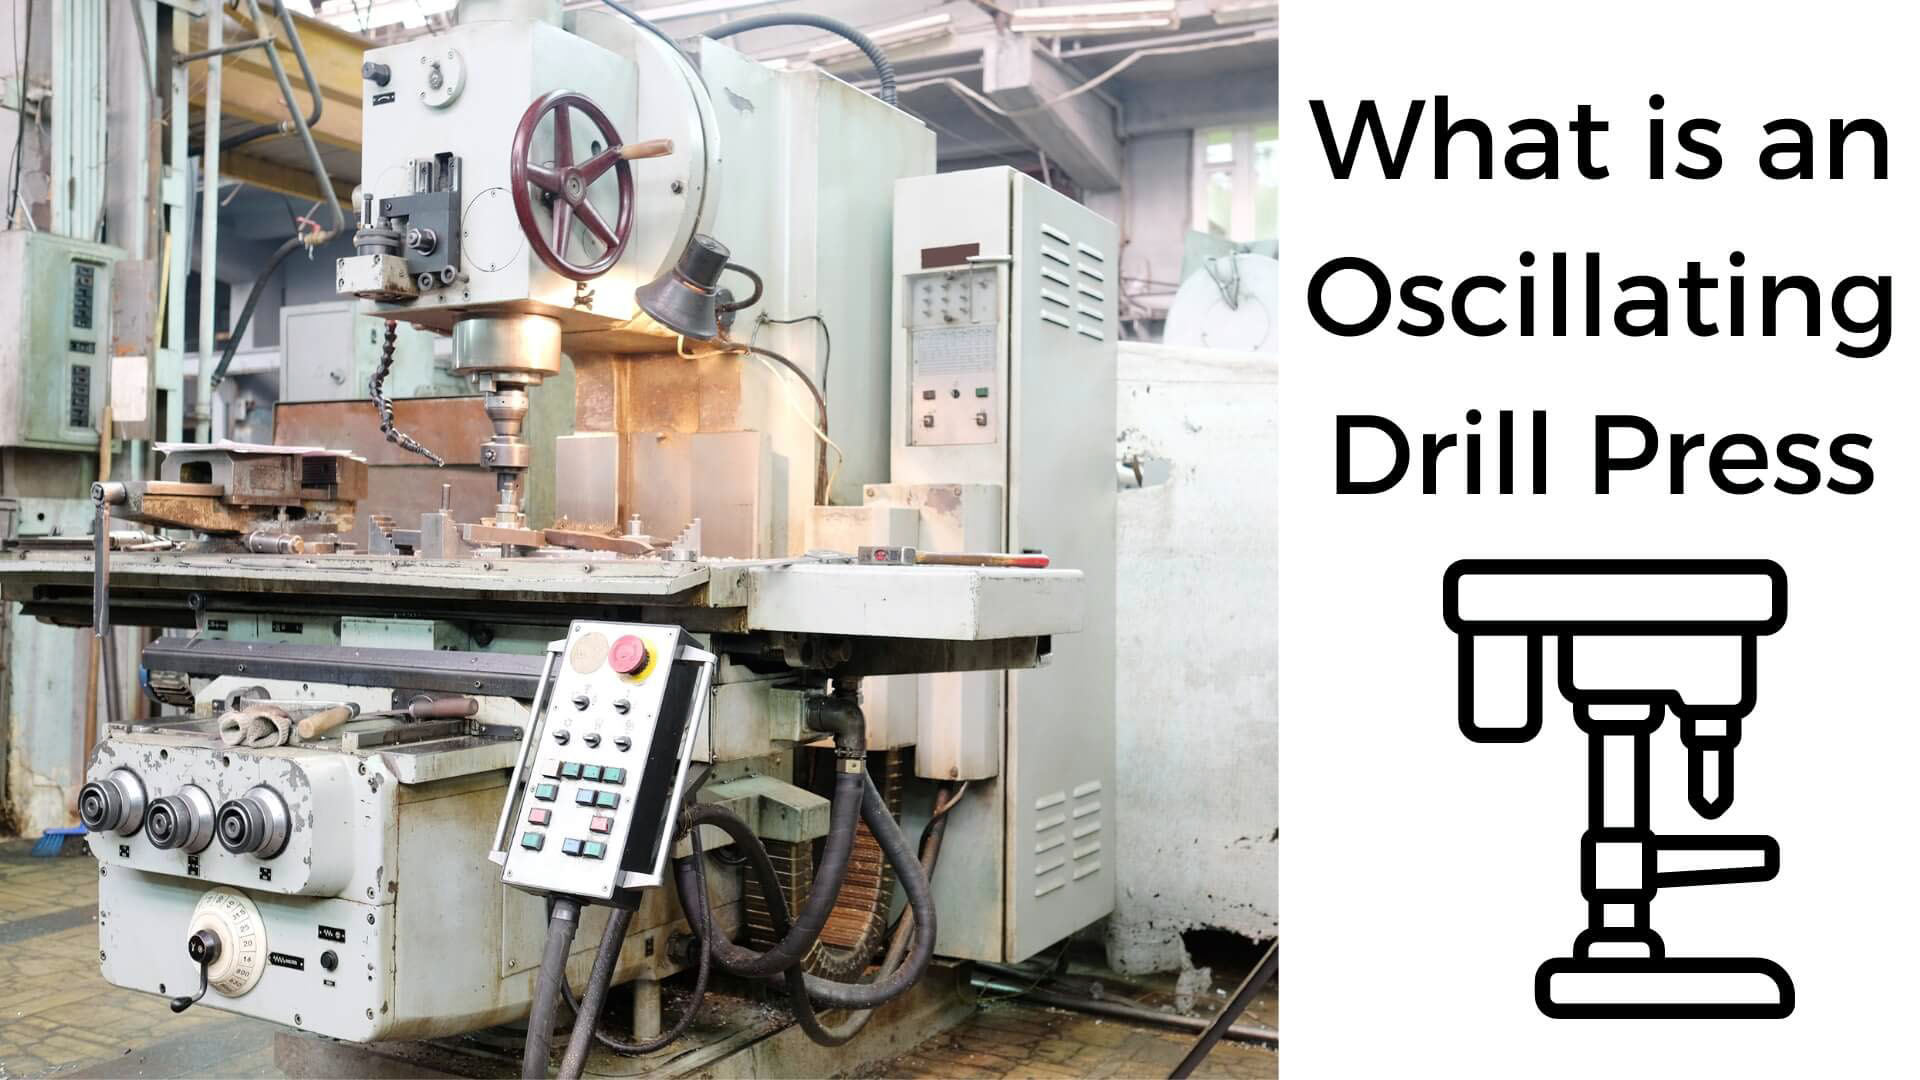 what is an oscillating drill press?